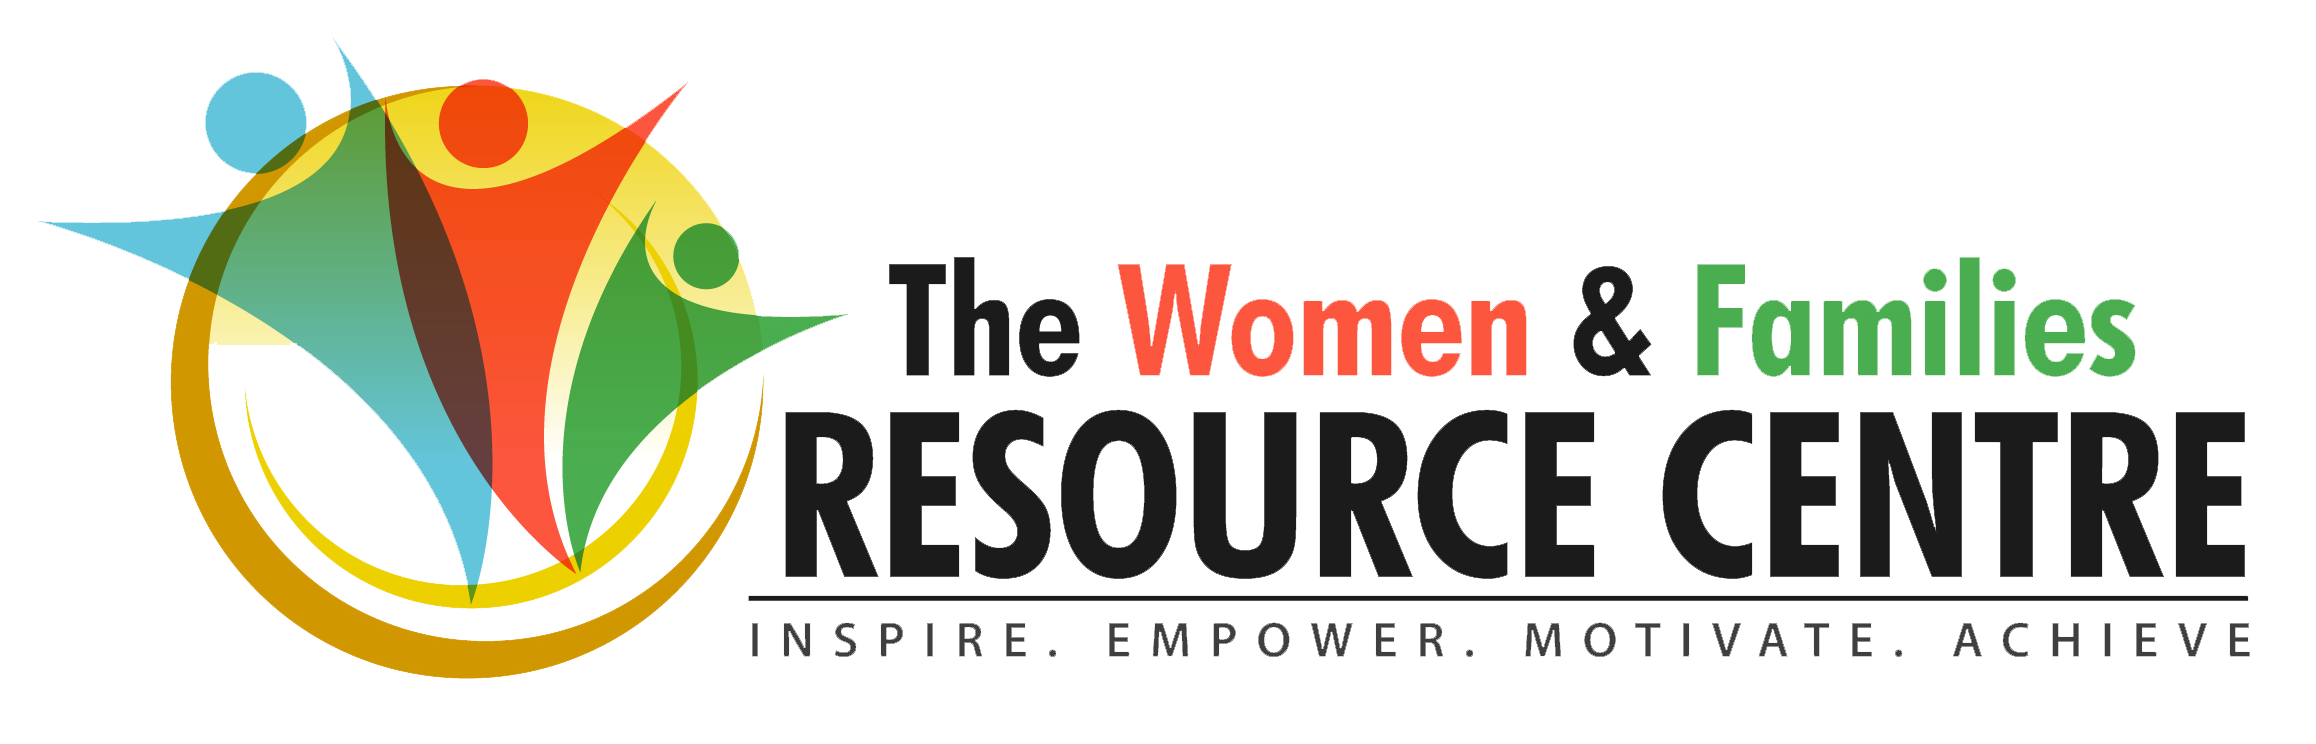 The Women and Families Resource Centre logo